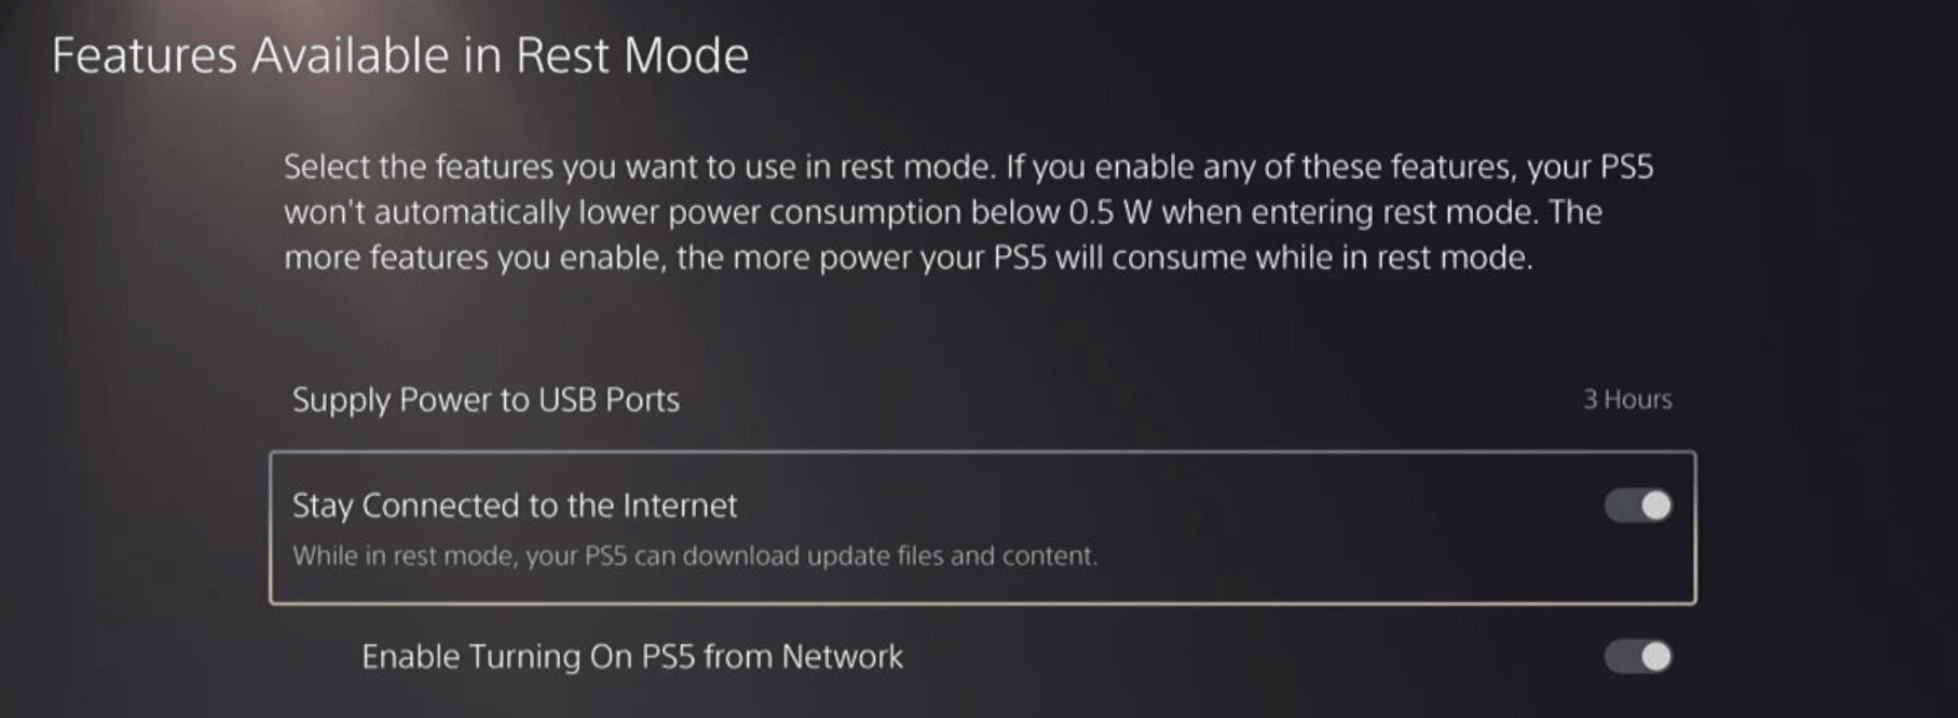 Stay Connected to the Internet is toggled in PS5 rest mode settings menu to enable automatic updates of Metro Quester